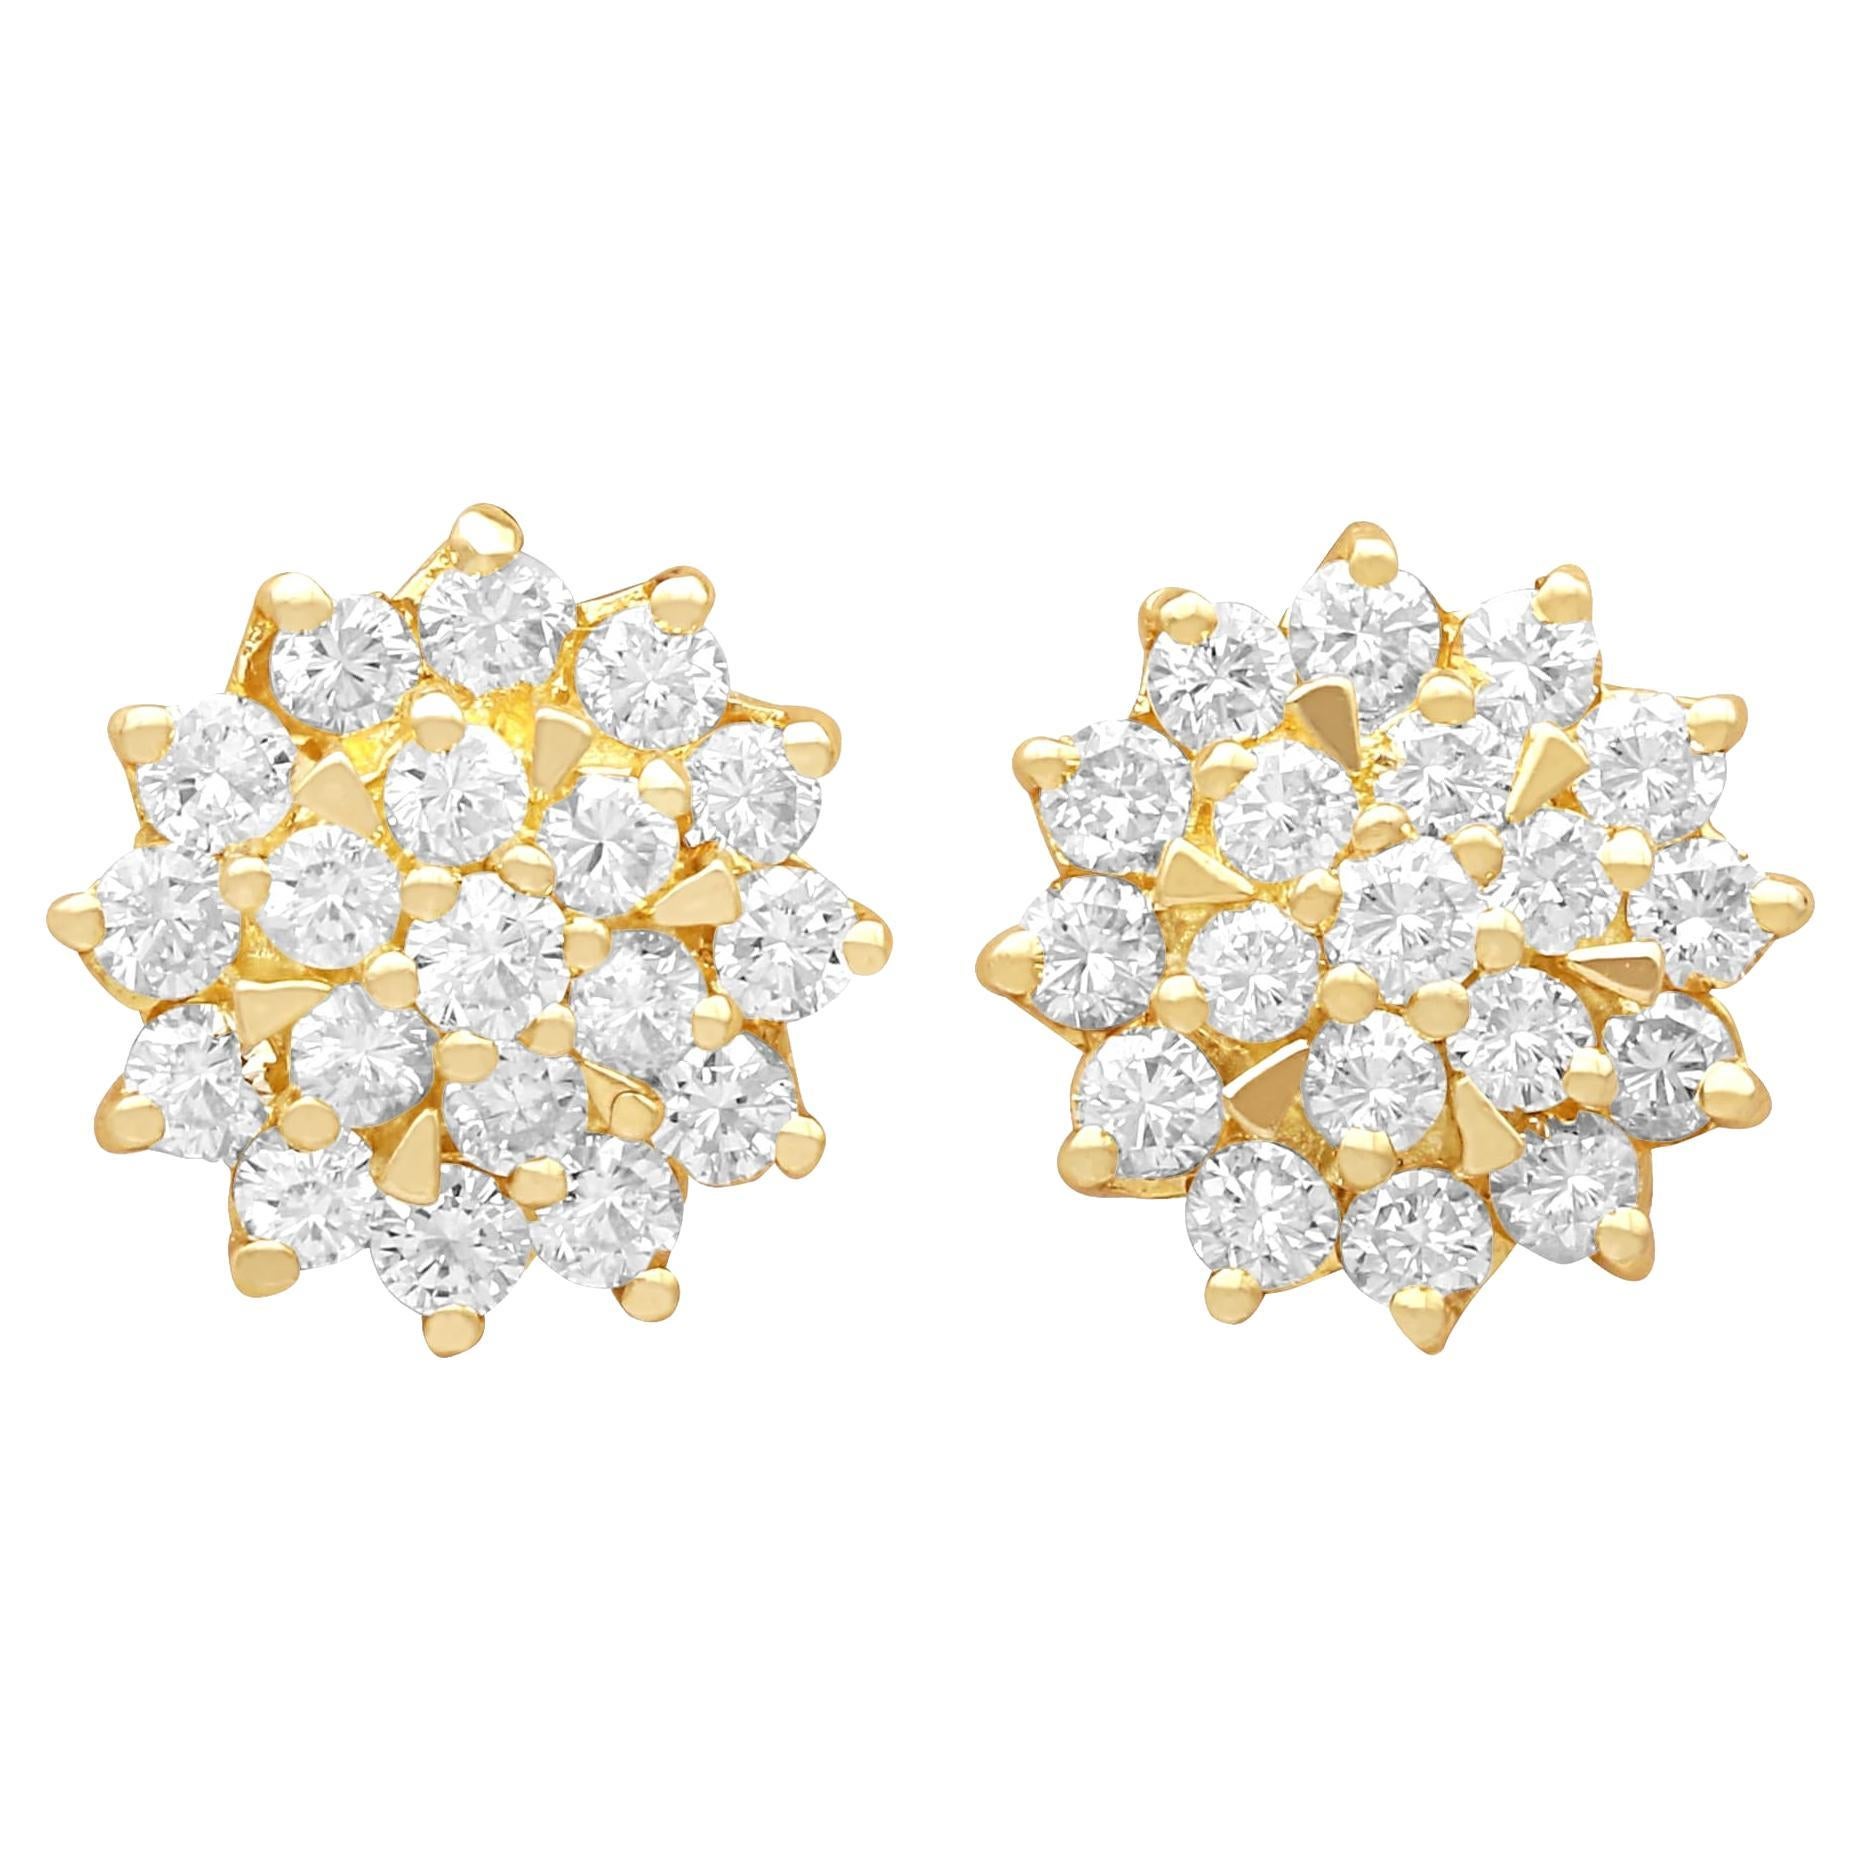 Vintage 1.00 Carat Diamond and 14k Yellow Gold Cluster Stud Earrings